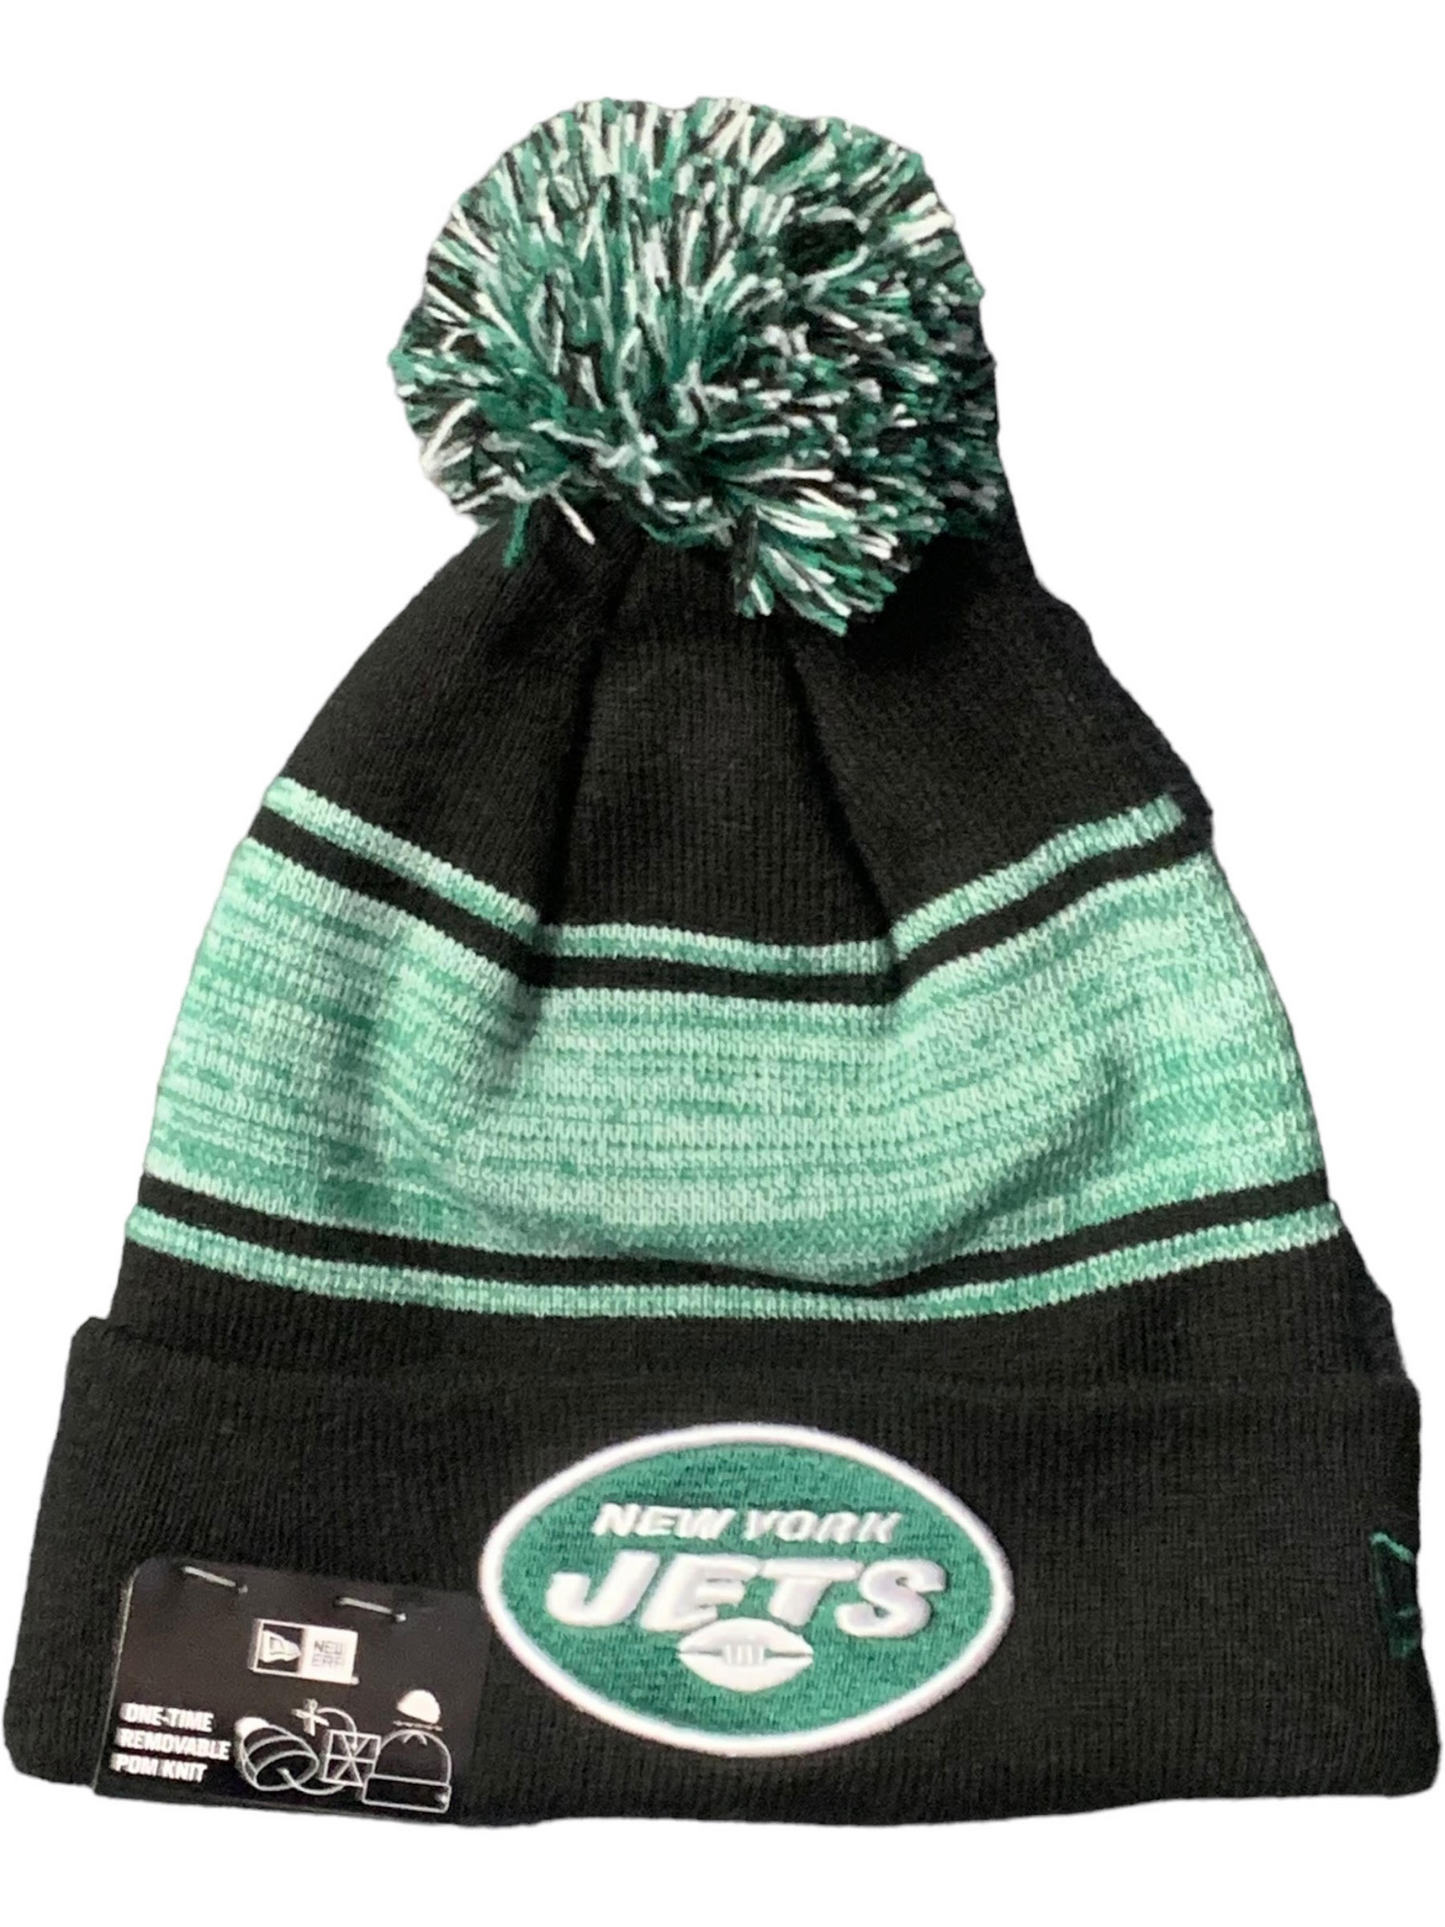 NEW YORK JETS CHILLED KNIT BEANIE